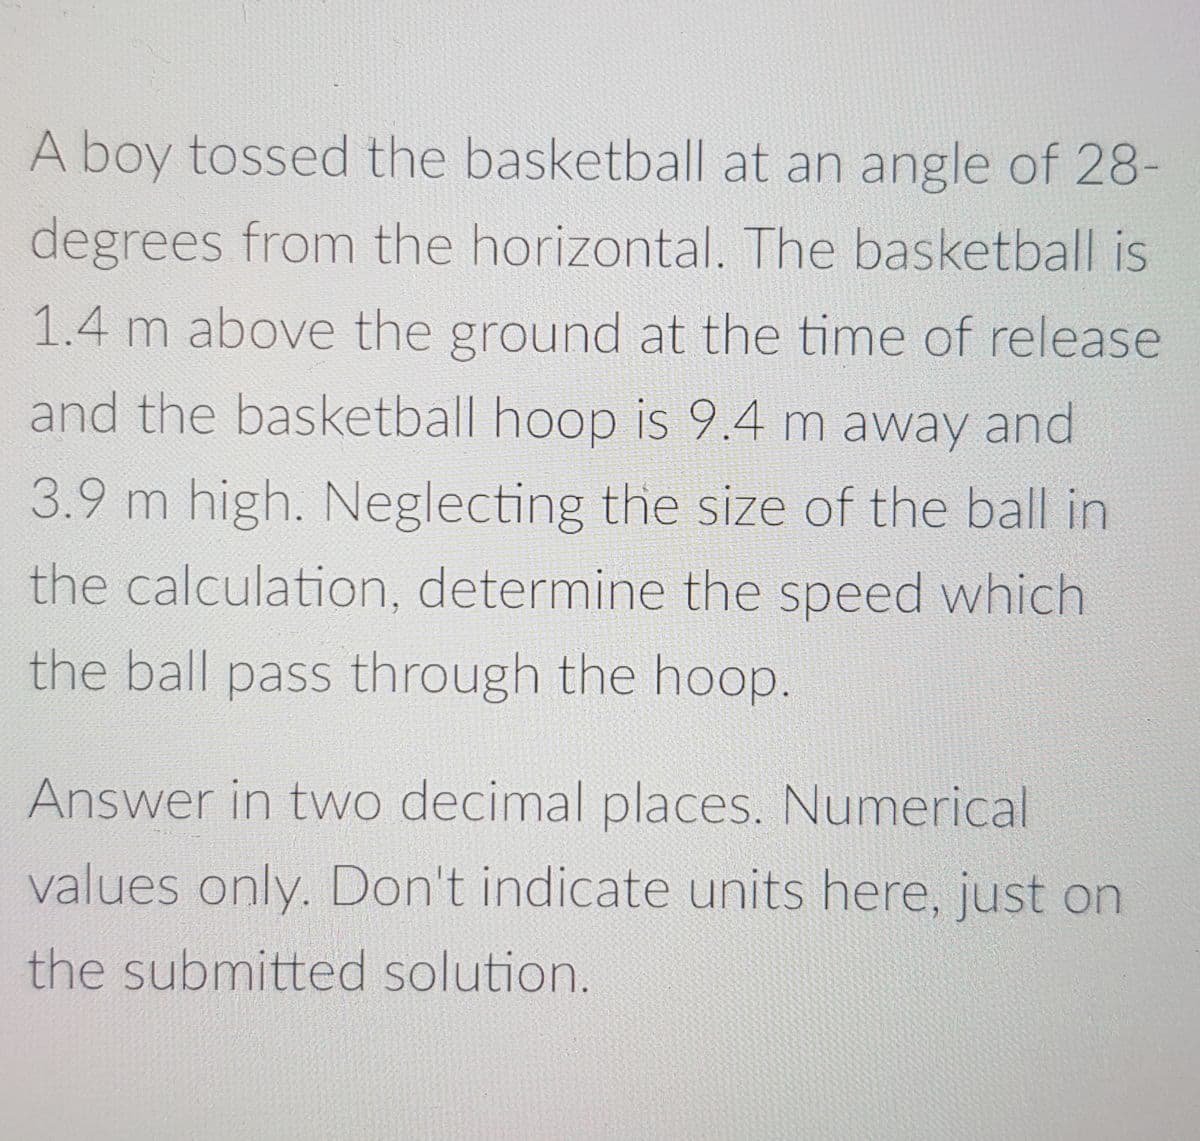 A boy tossed the basketball at an angle of 28-
degrees from the horizontal. The basketball is
1.4 m above the ground at the time of release
and the basketball hoop is 9.4 m away and
3.9 m high. Neglecting the size of the ball in
the calculation, determine the speed which
the ball pass through the hoop.
Answer in two decimal places. Numerical
values only. Don't indicate units here, just on
the submitted solution.
